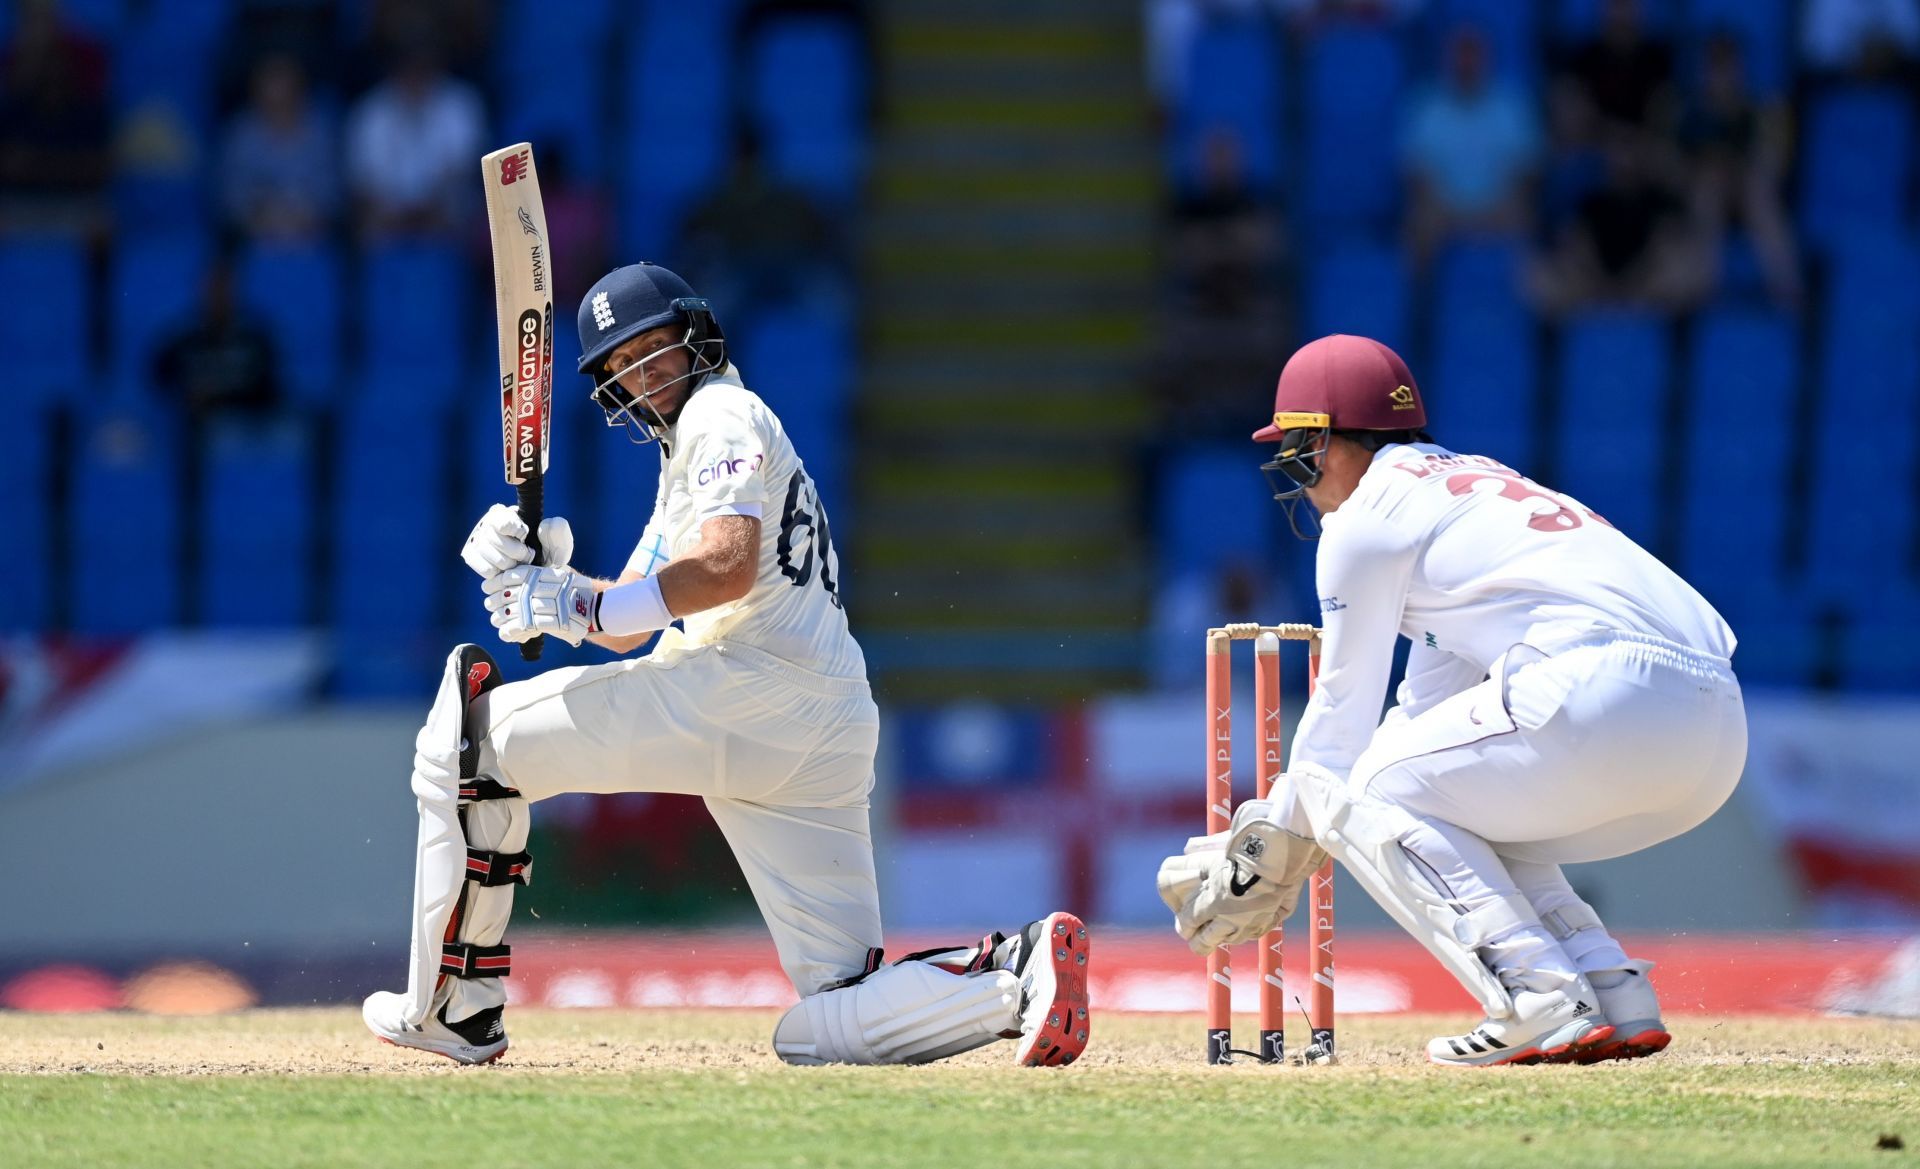 West Indies v England - 1st Test: Day Five